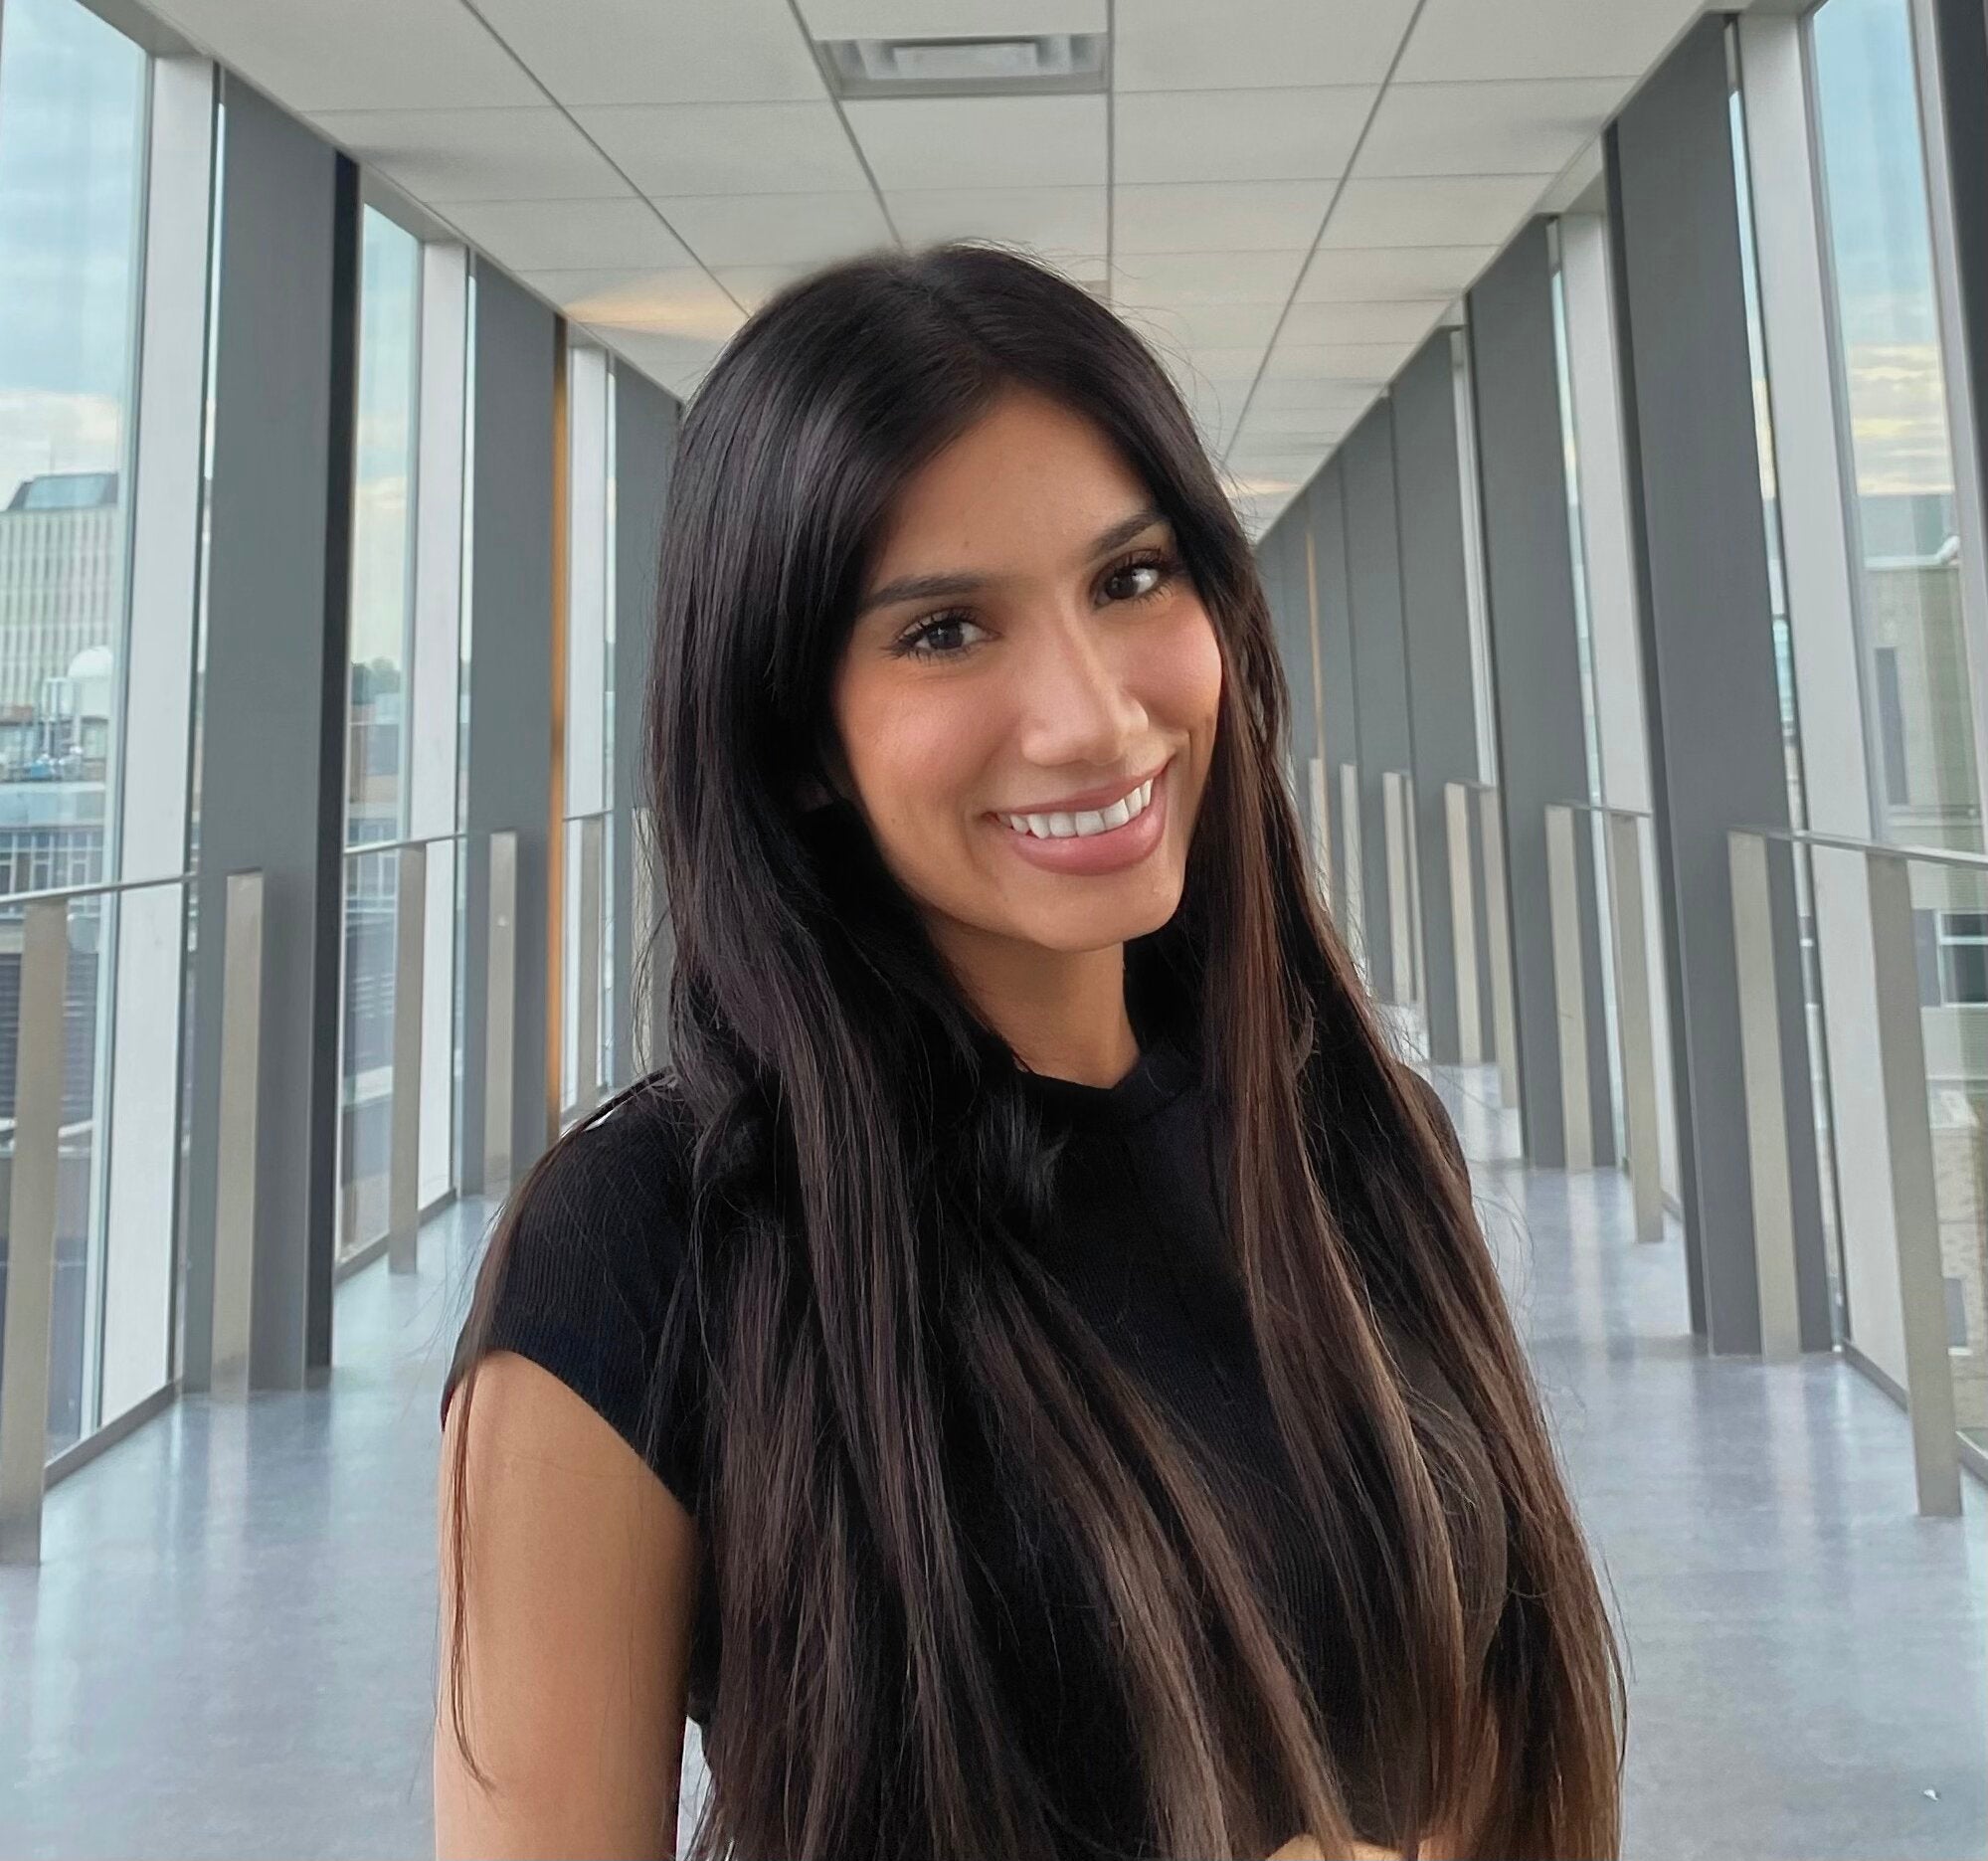 A photo of Esha smiling on the Engineering bridge at the University of Waterloo.